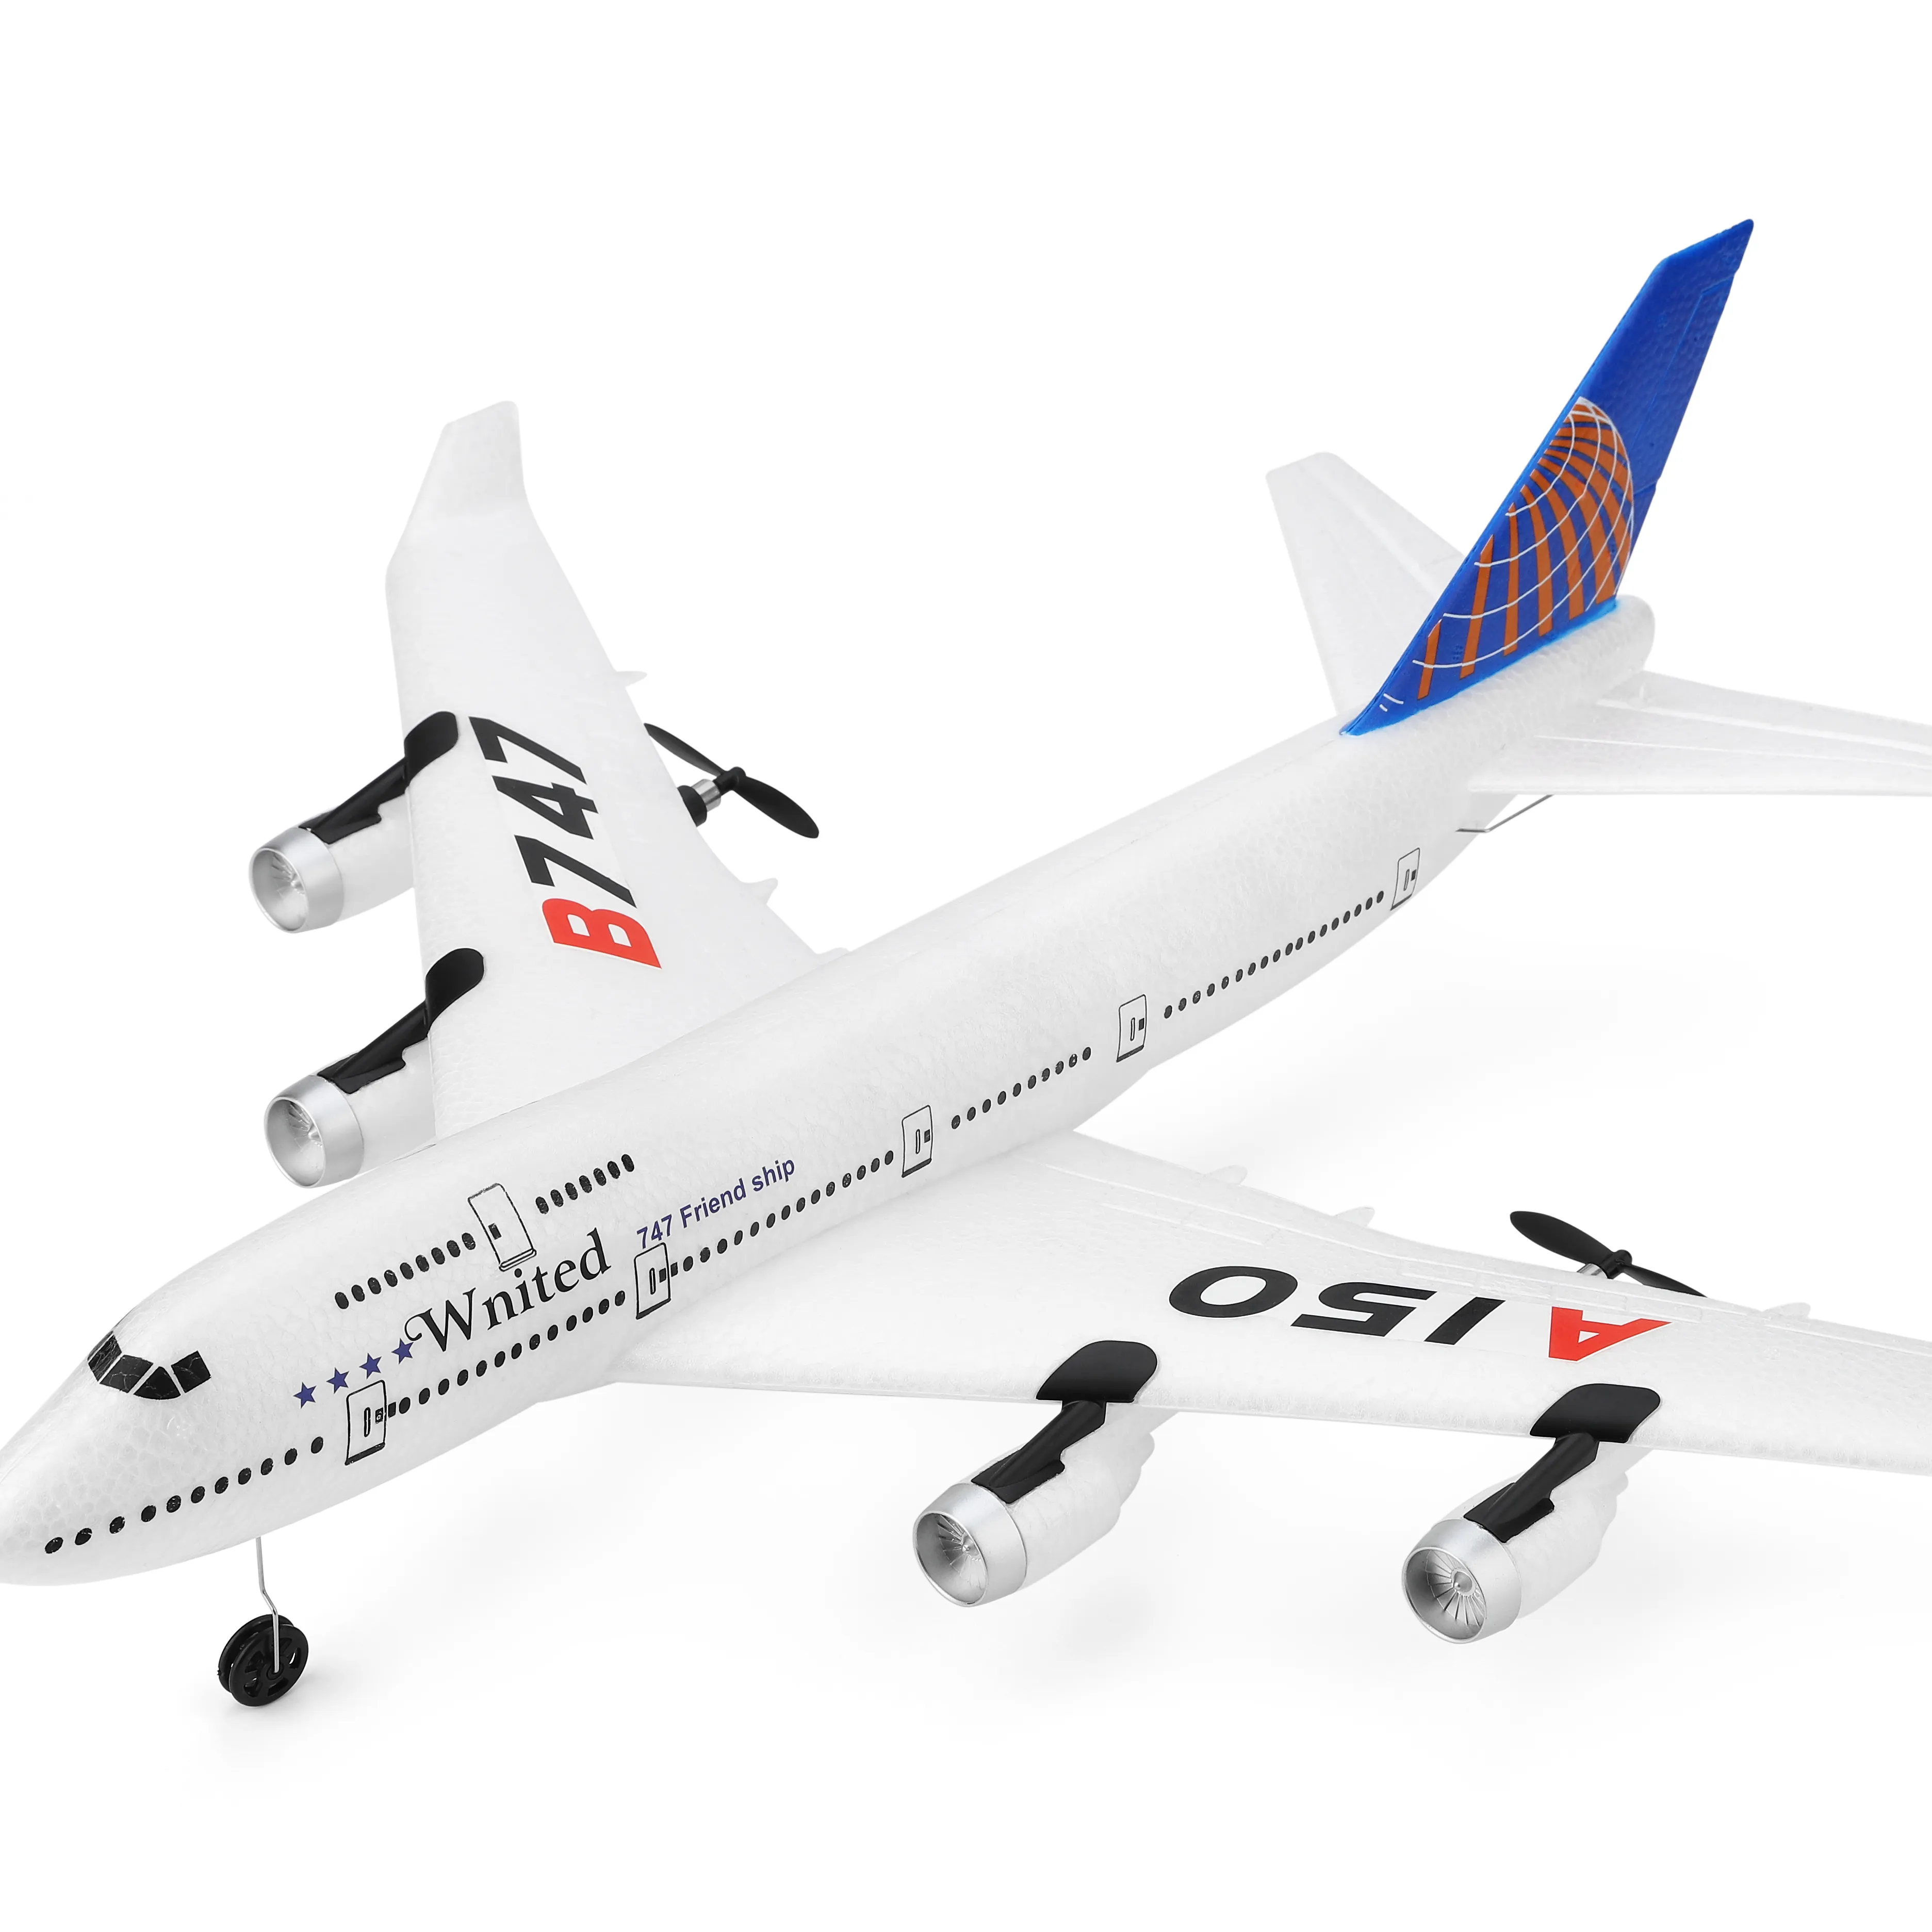 WLTOYS A150-Boeing-B747 2.4G 3CH Flying Radio Control Airplane Toys RC Model for Sale